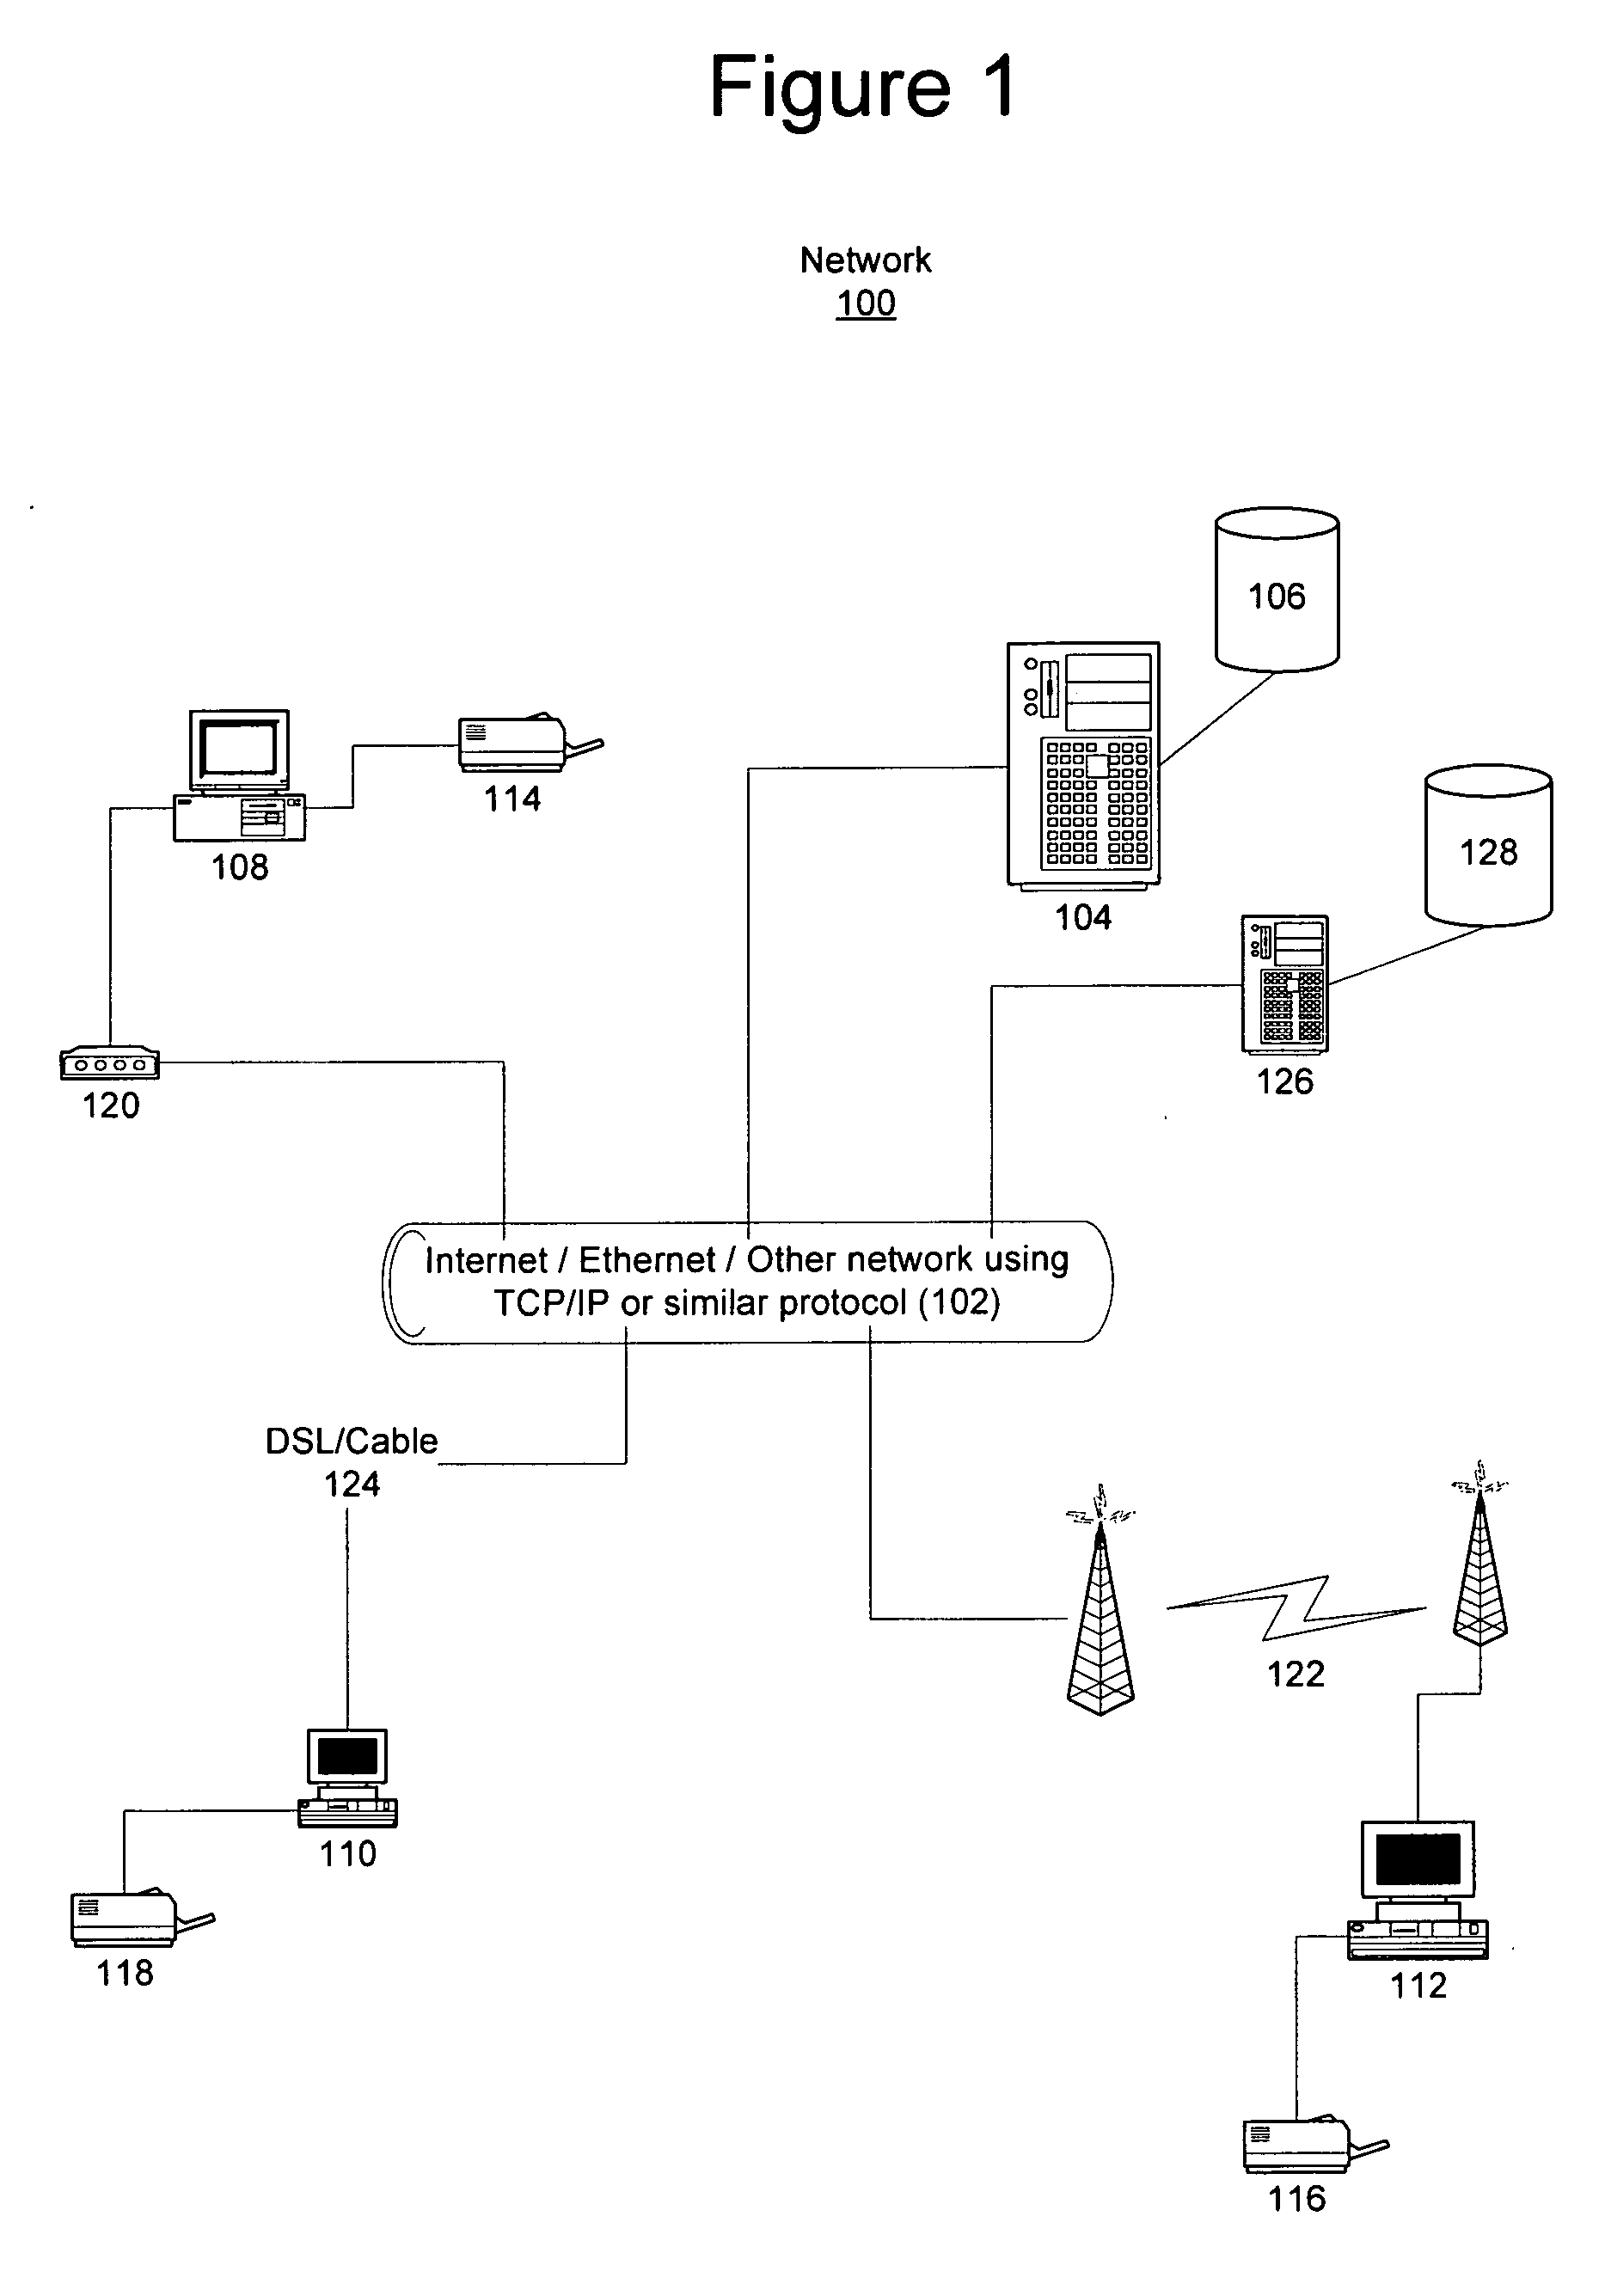 Method for determining compatibility